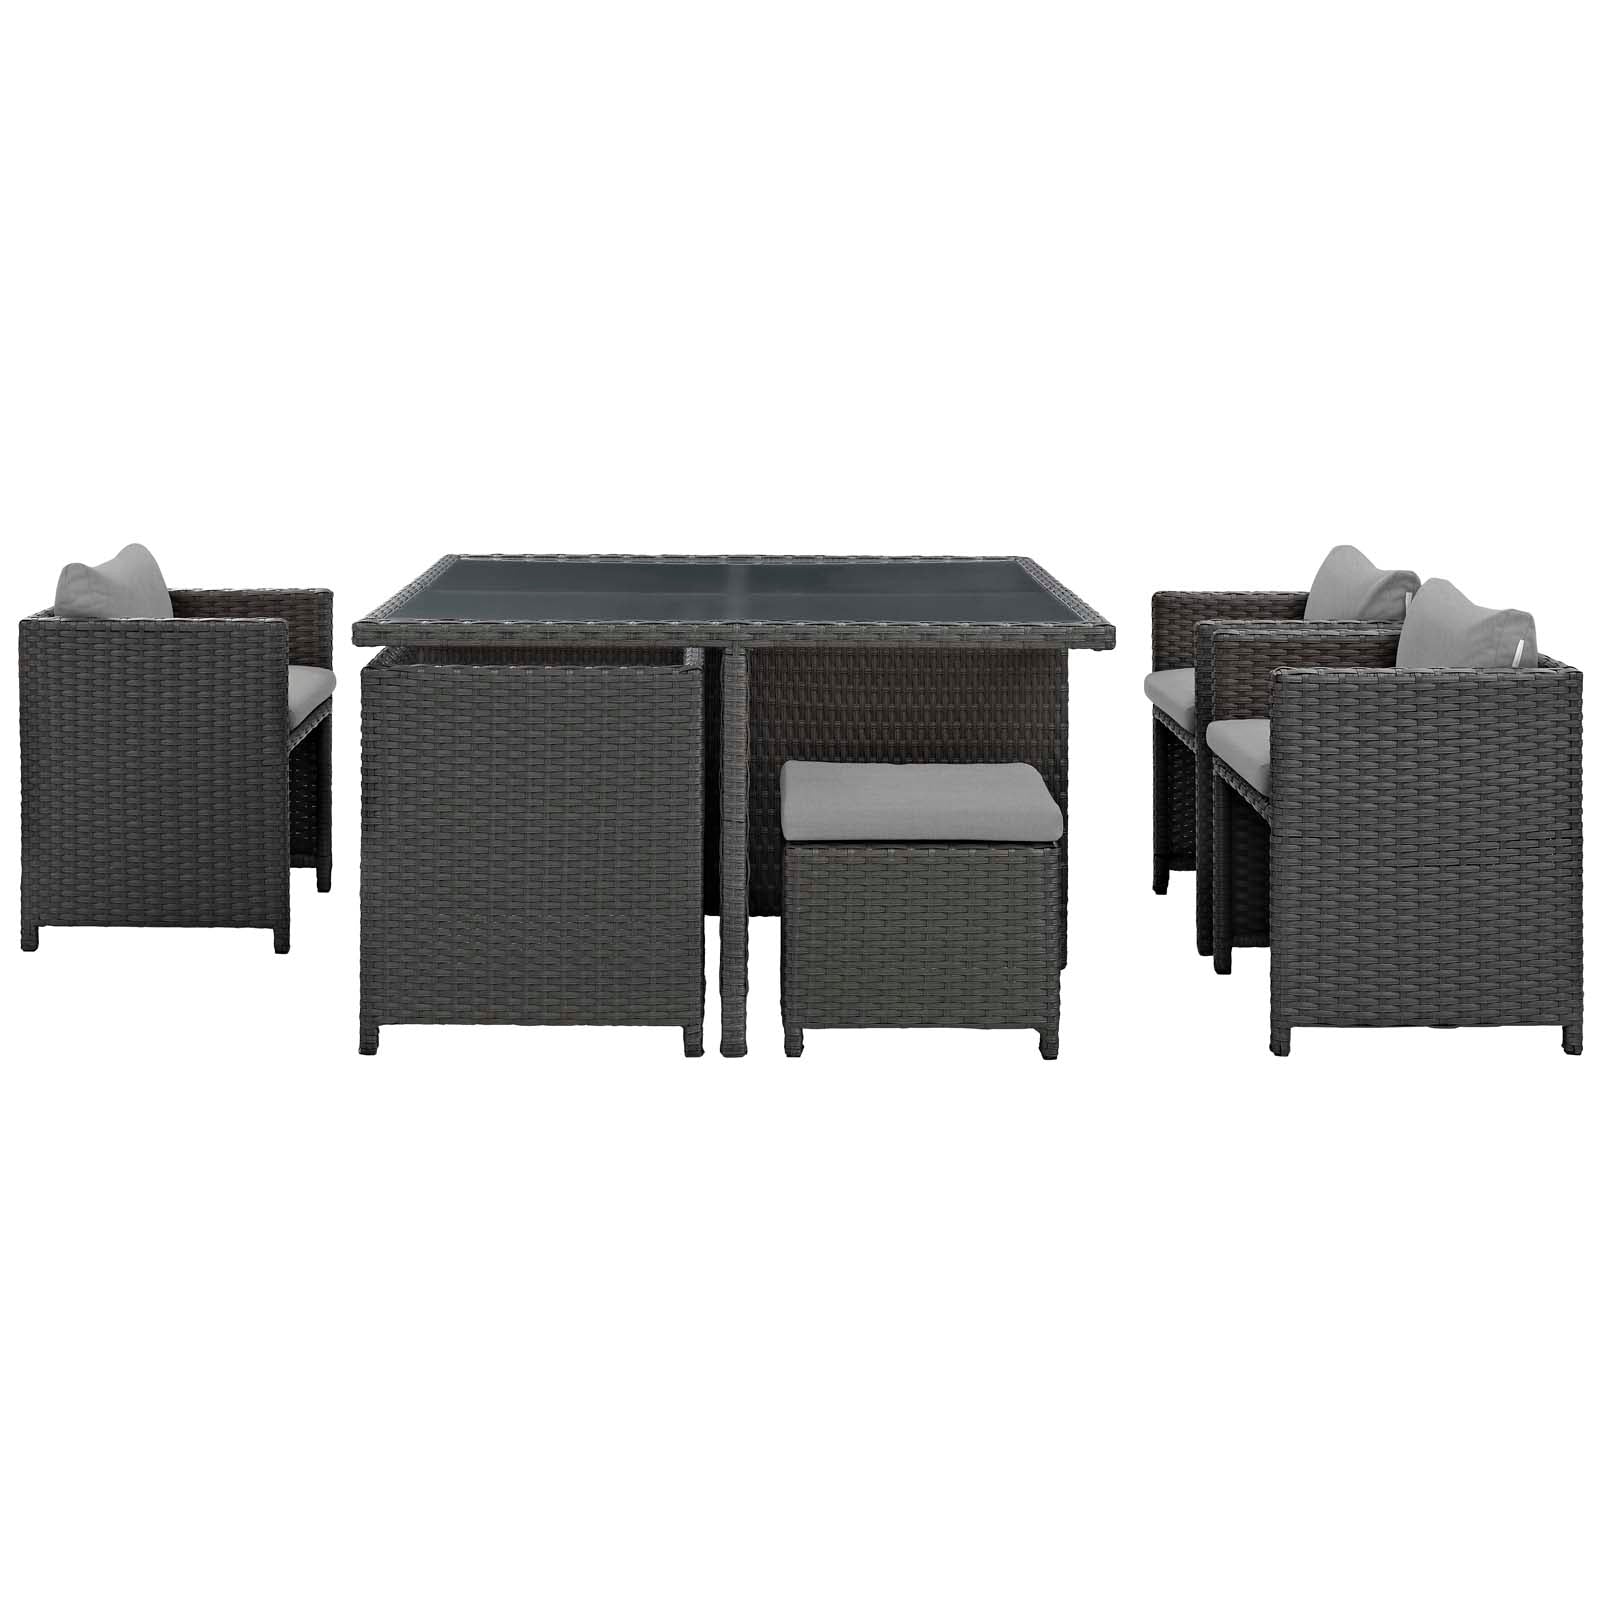 Modway Outdoor Dining Sets - Sojourn 9 Piece Outdoor Patio Dining Set Canvas Gray